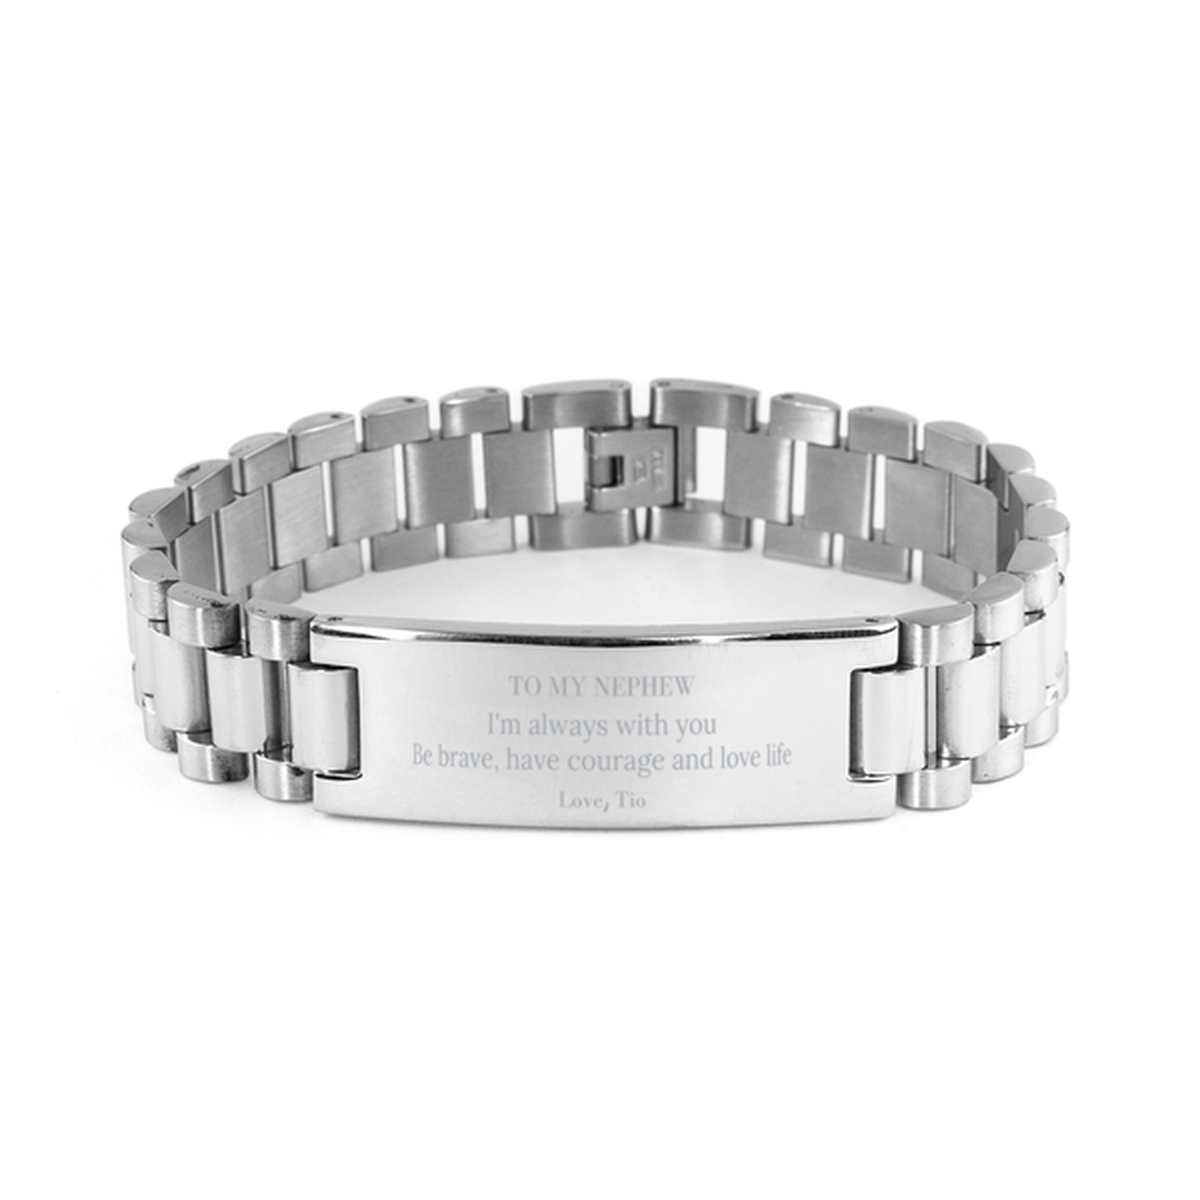 To My Nephew Gifts from Tio, Unique Ladder Stainless Steel Bracelet Inspirational Christmas Birthday Graduation Gifts for Nephew I'm always with you. Be brave, have courage and love life. Love, Tio